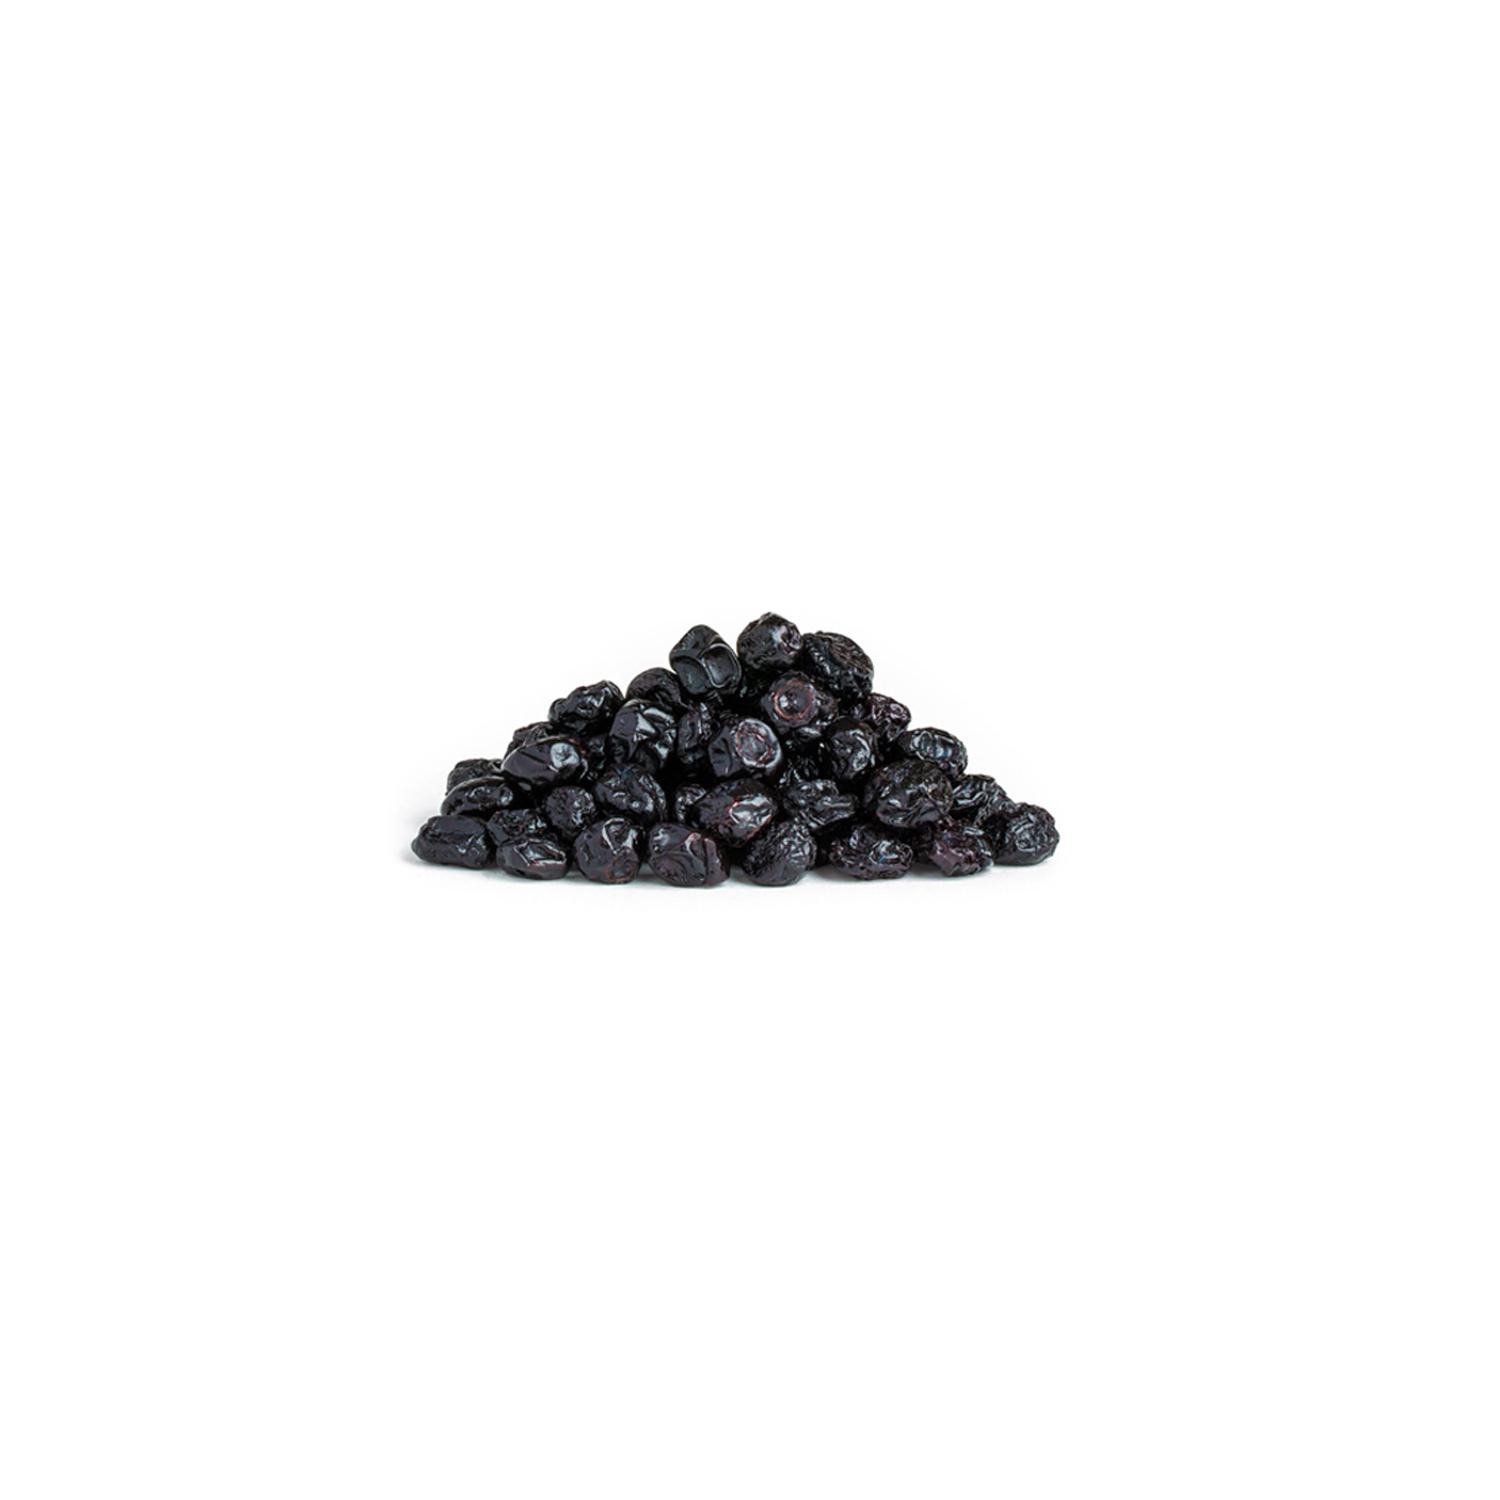 BLUEBERRIES DRIED FRUIT 500GMS